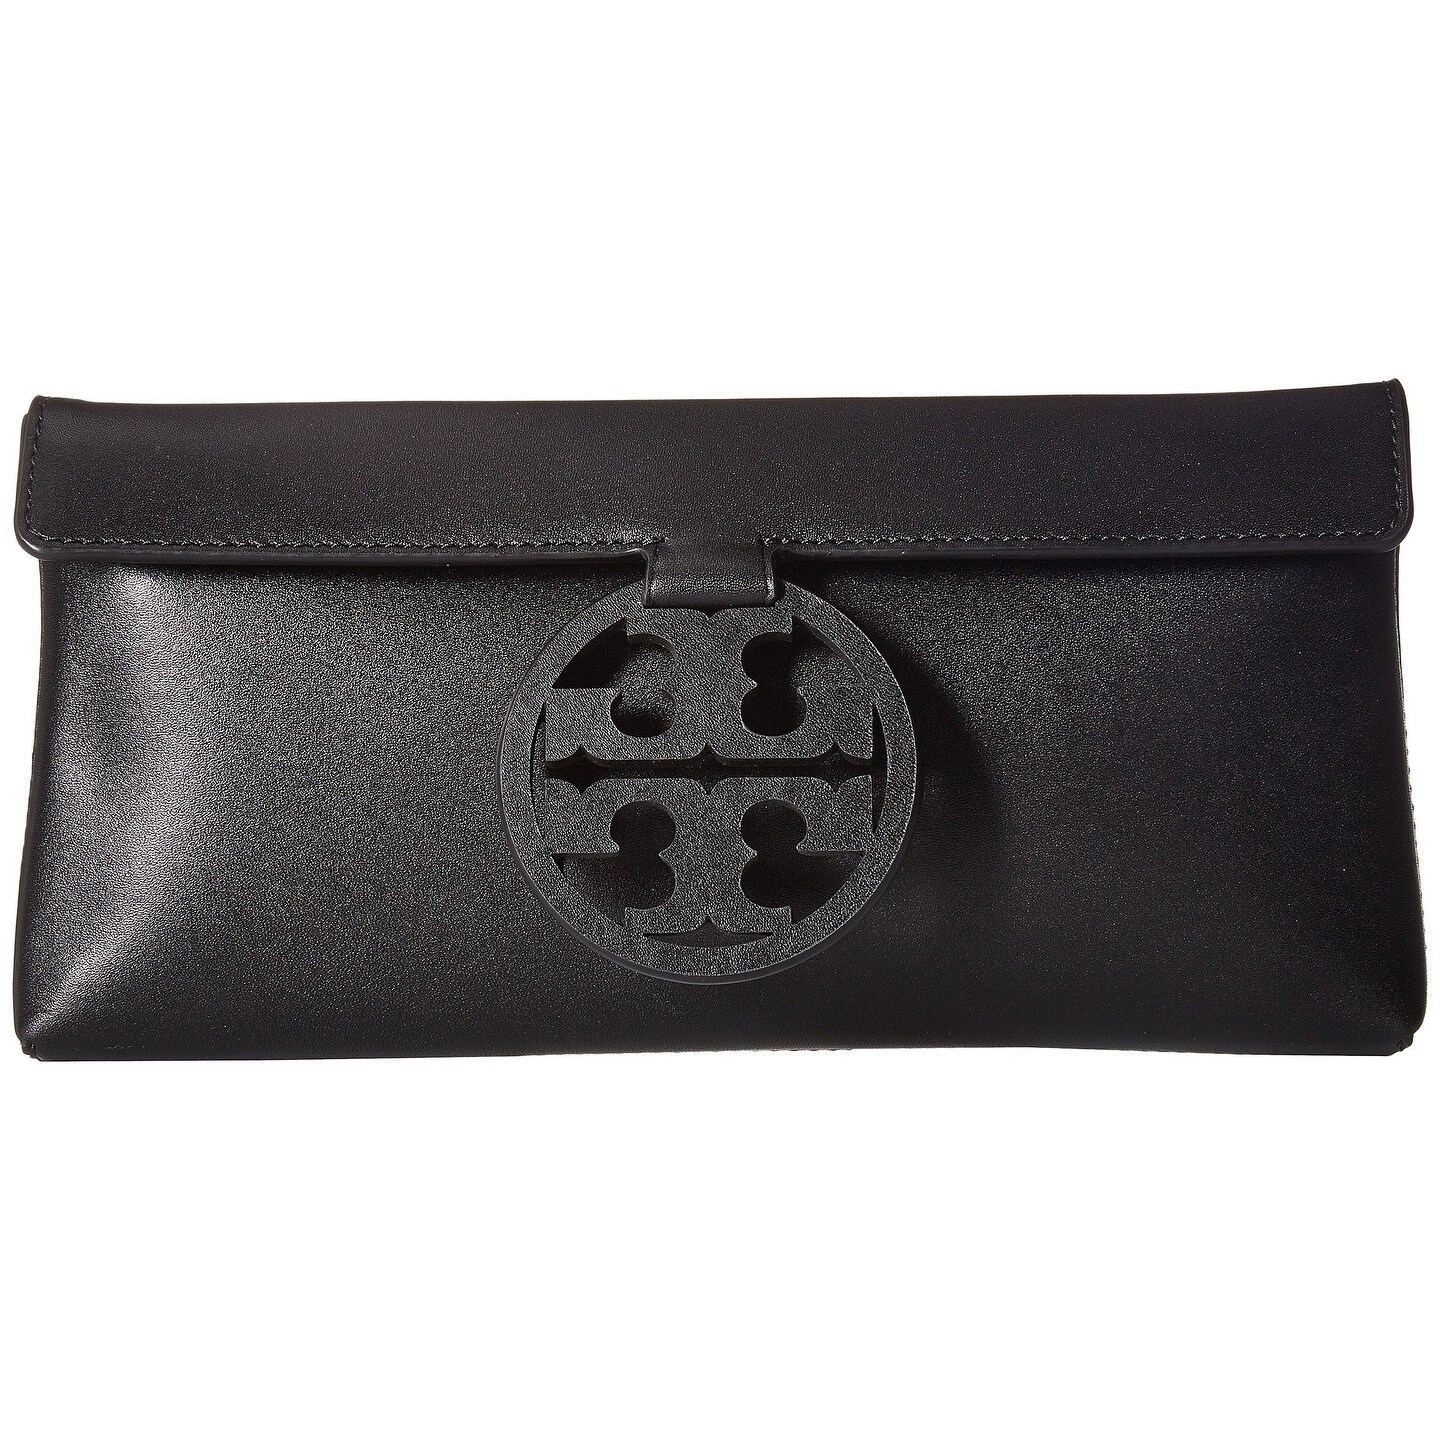 tory burch miller leather clutch